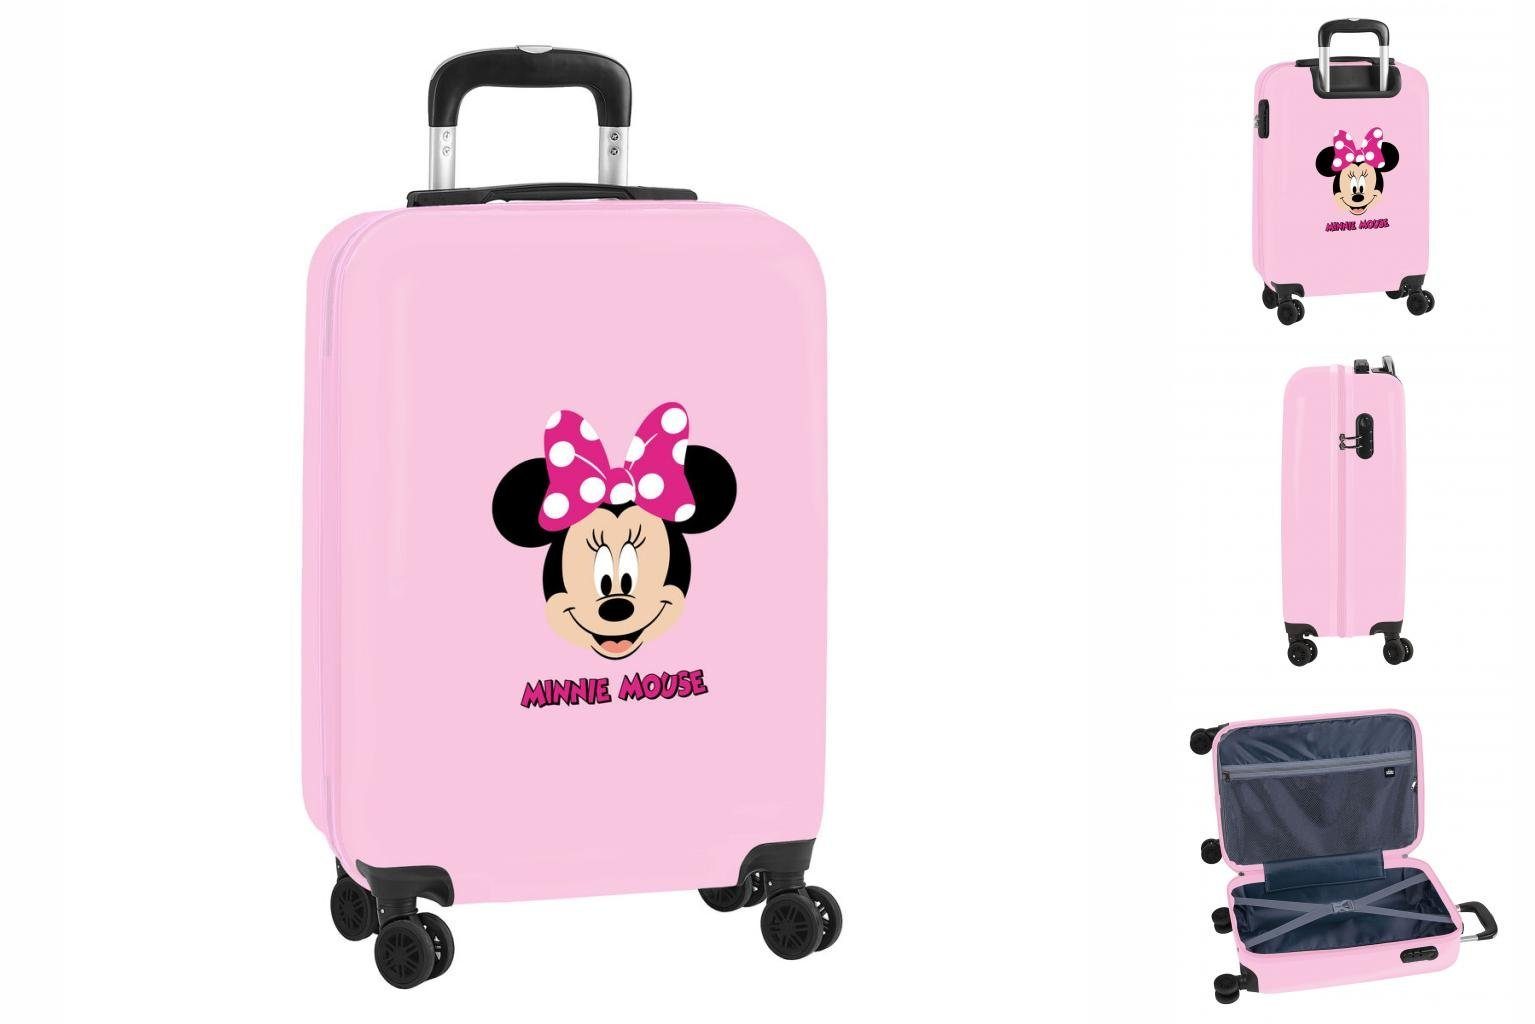 Disney Minnie Mouse Trolley Minnie mouse Koffer für die Kabine Minnie Mouse My Time Rosa 20 Zoll 3